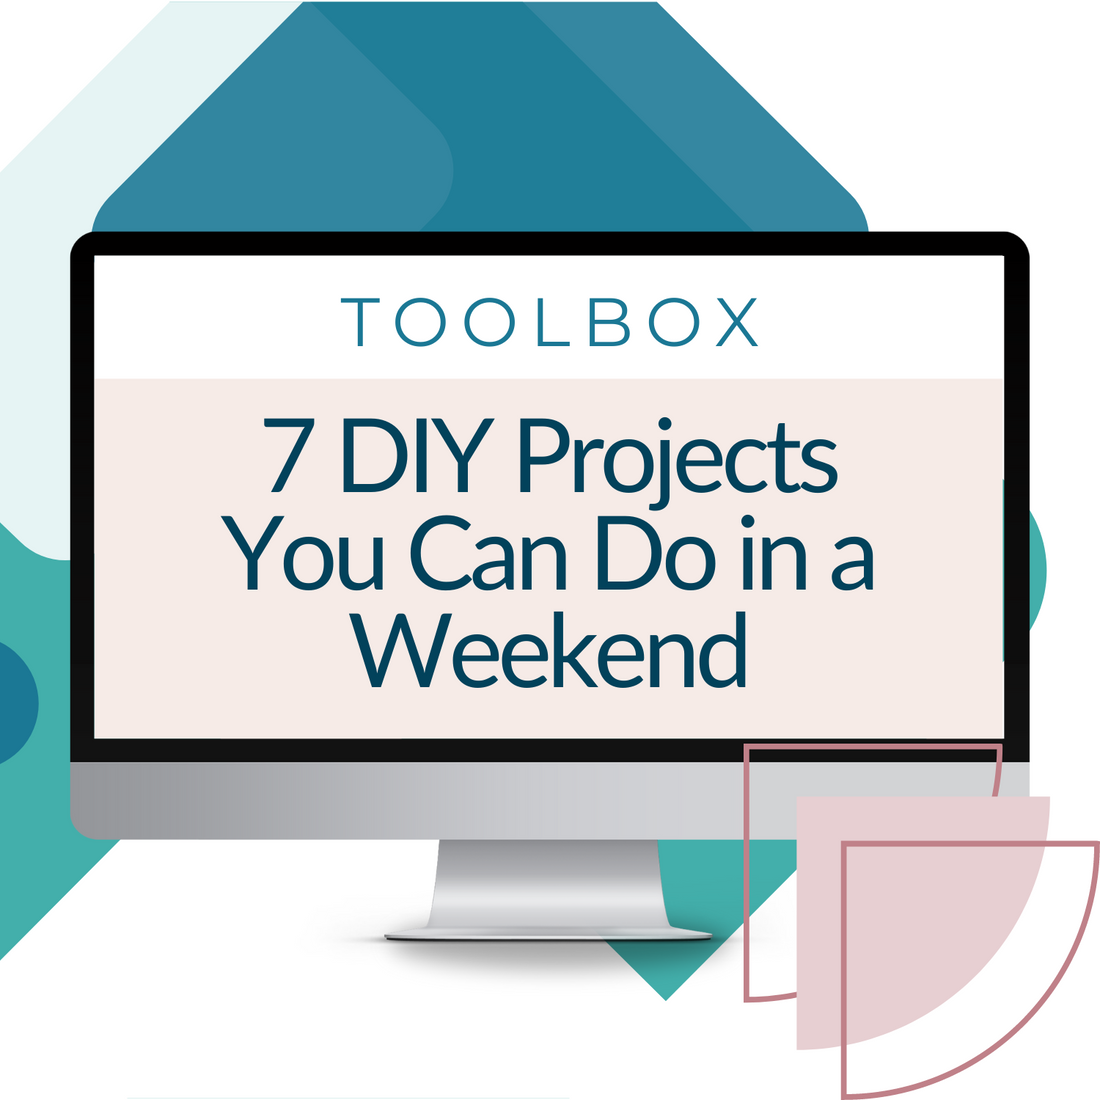 Learn how to transform your home with these easy-to-follow tutorials for 7 DIY projects. Upgrade your living space in just a weekend with My Homier Home&